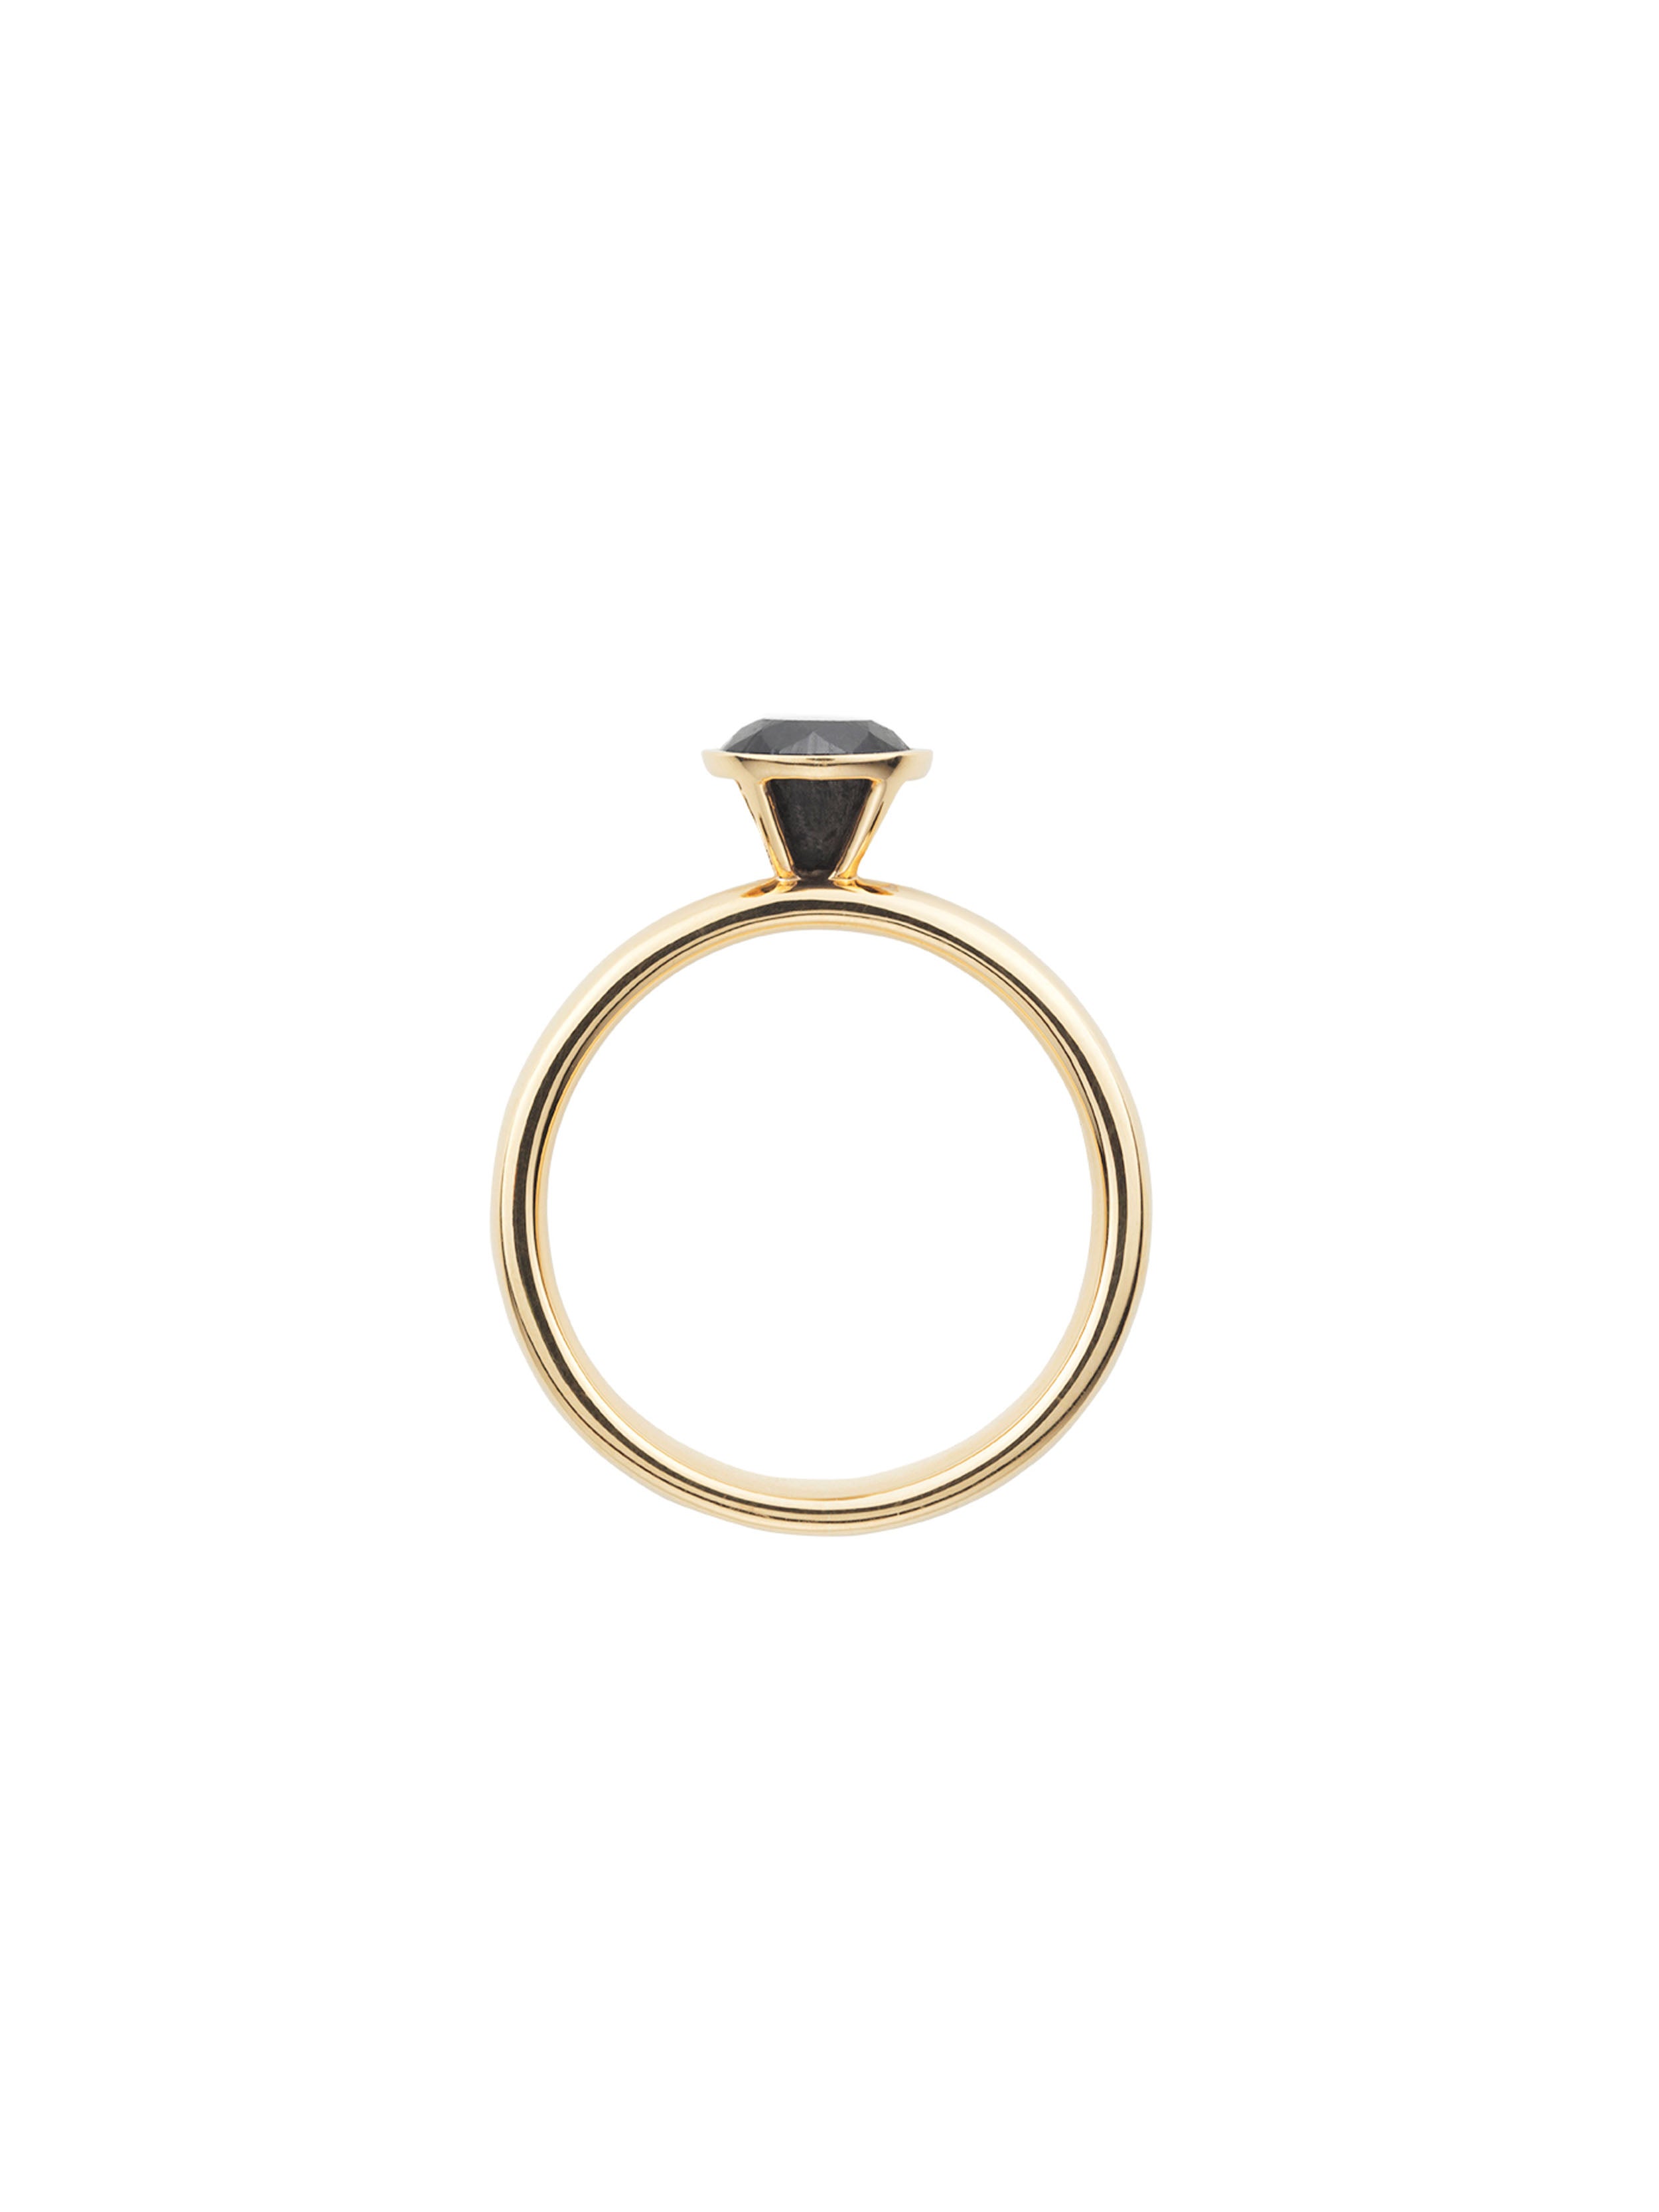 KINRADEN APS FOR A DAY Ring - 18k gold Rings